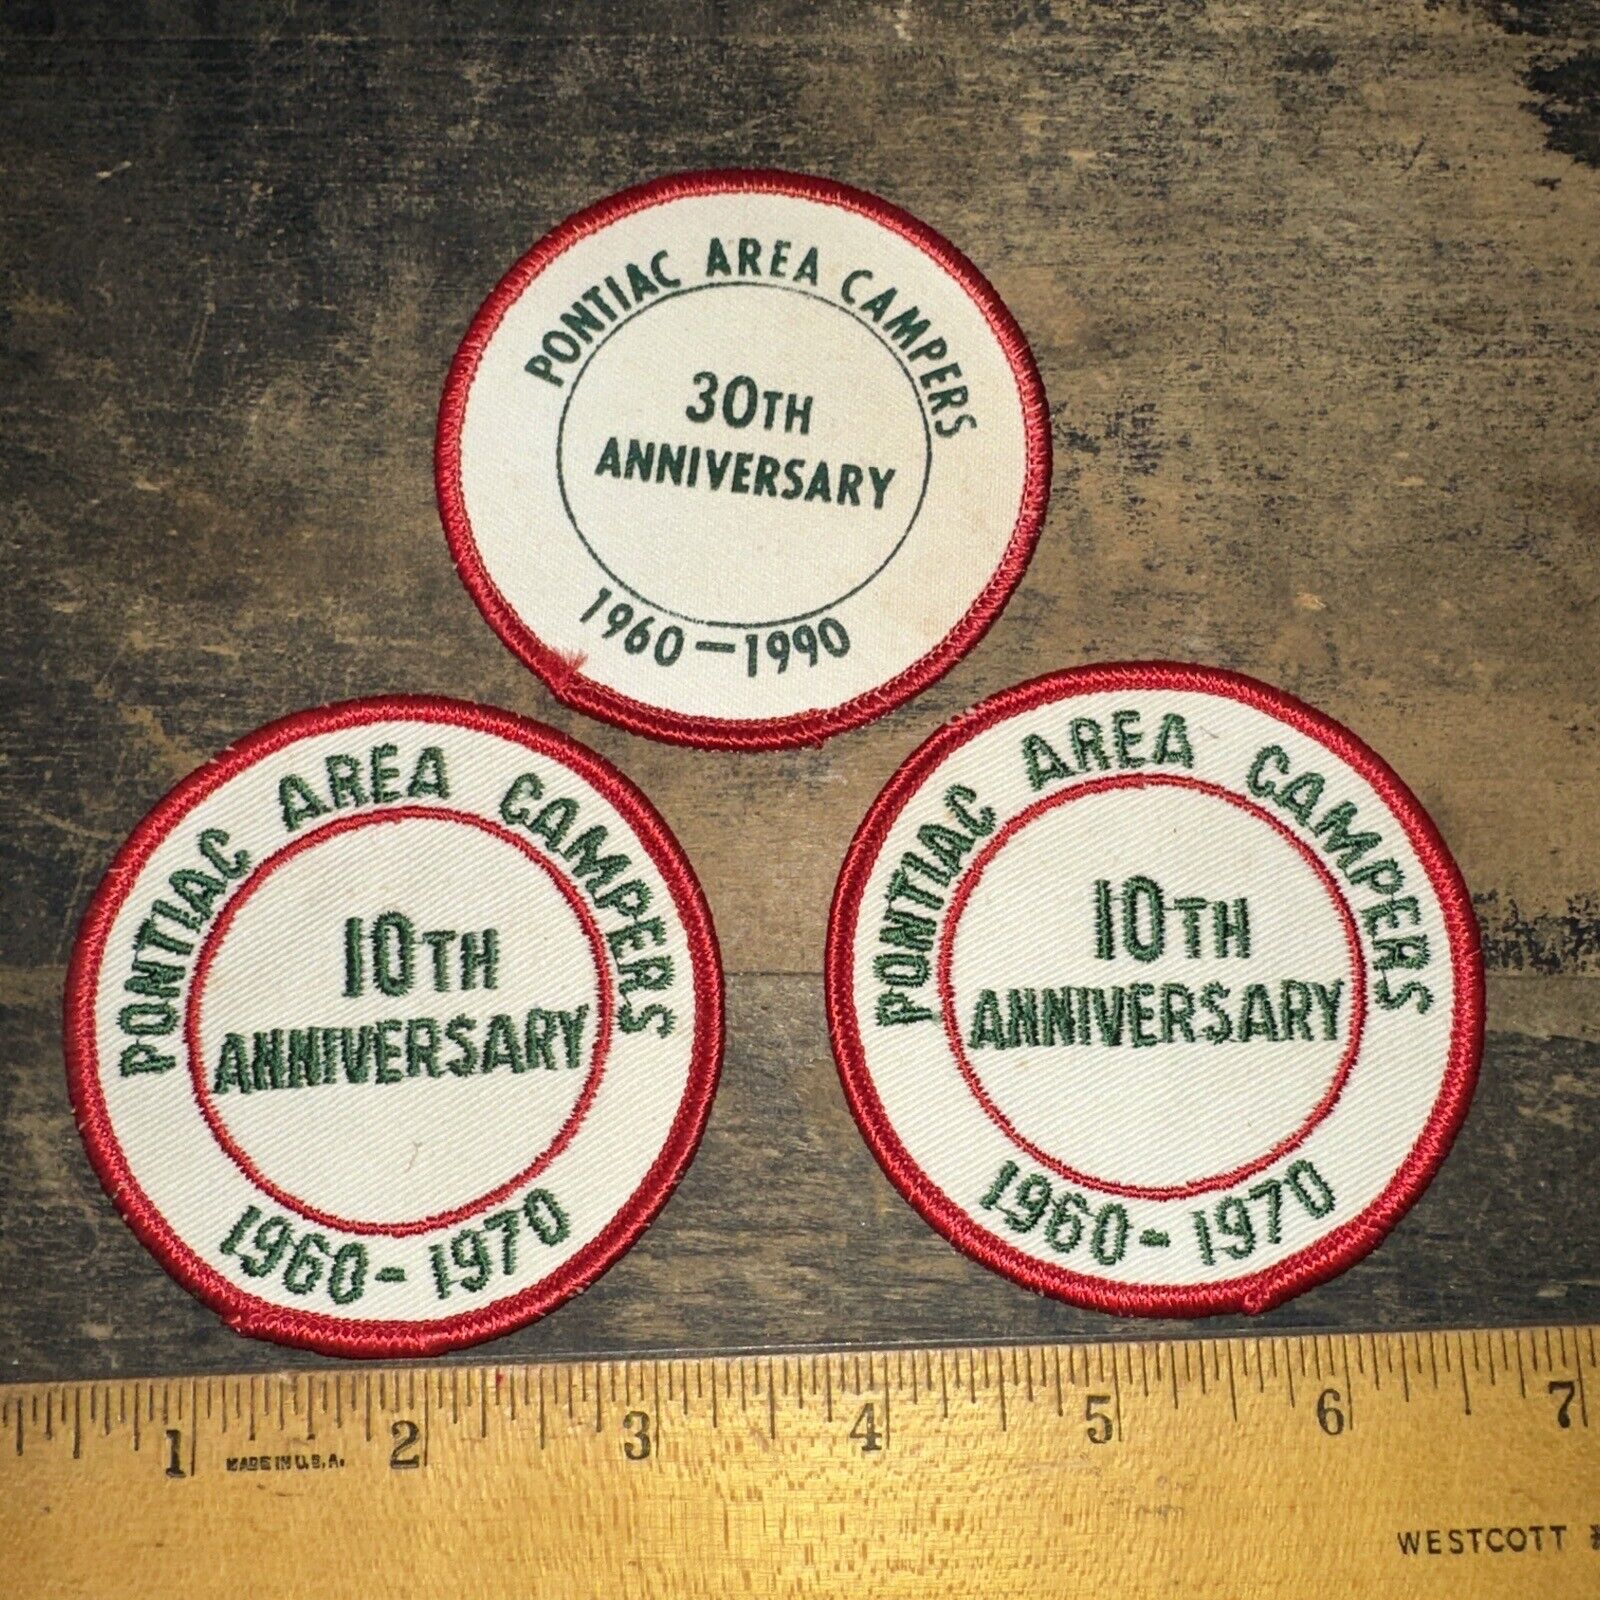 3 Pontiac Area (Campers Patches) 10Th Anniversary & 30Th Anniversary ￼1960-1970